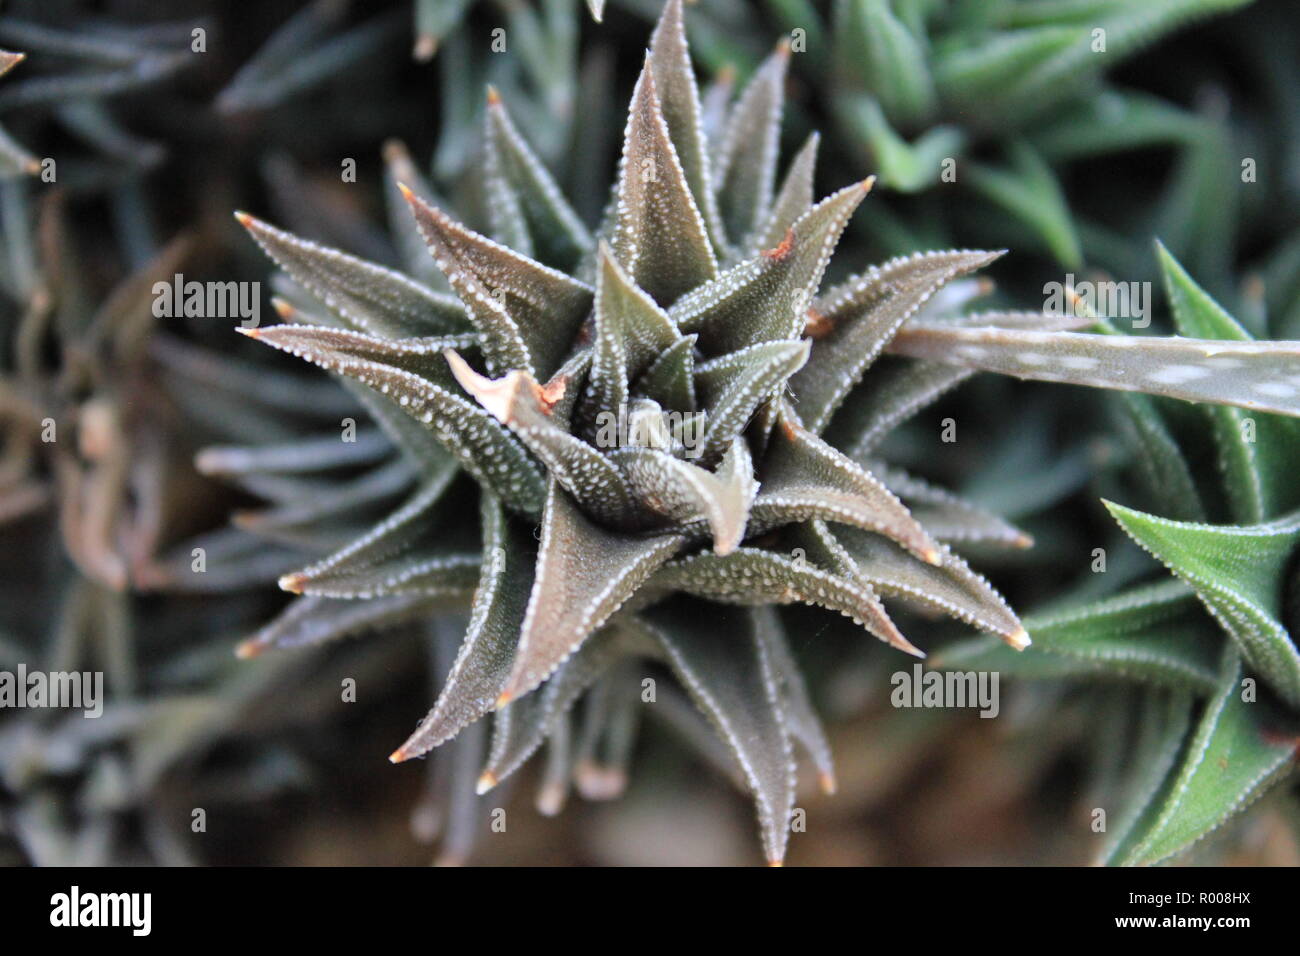 Astroloba cultivated ornamental cactus and succulent desert plant growing in an arid environment. Stock Photo